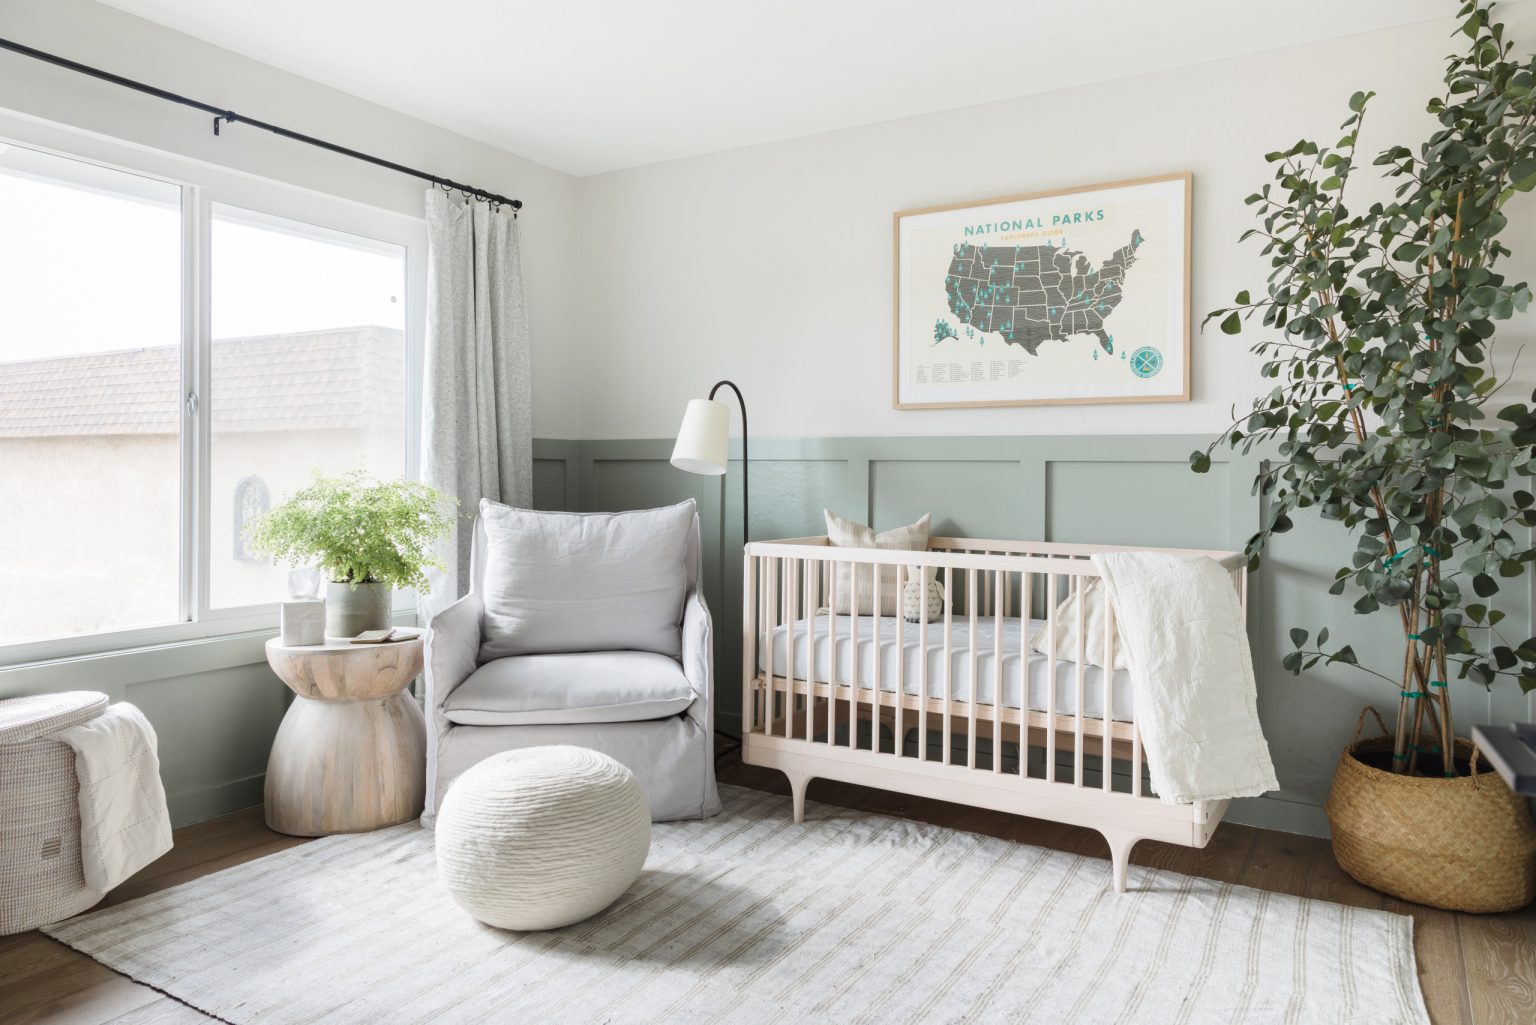 18 Transitional Nursery Interior Design Ideas for the Stylish and ...